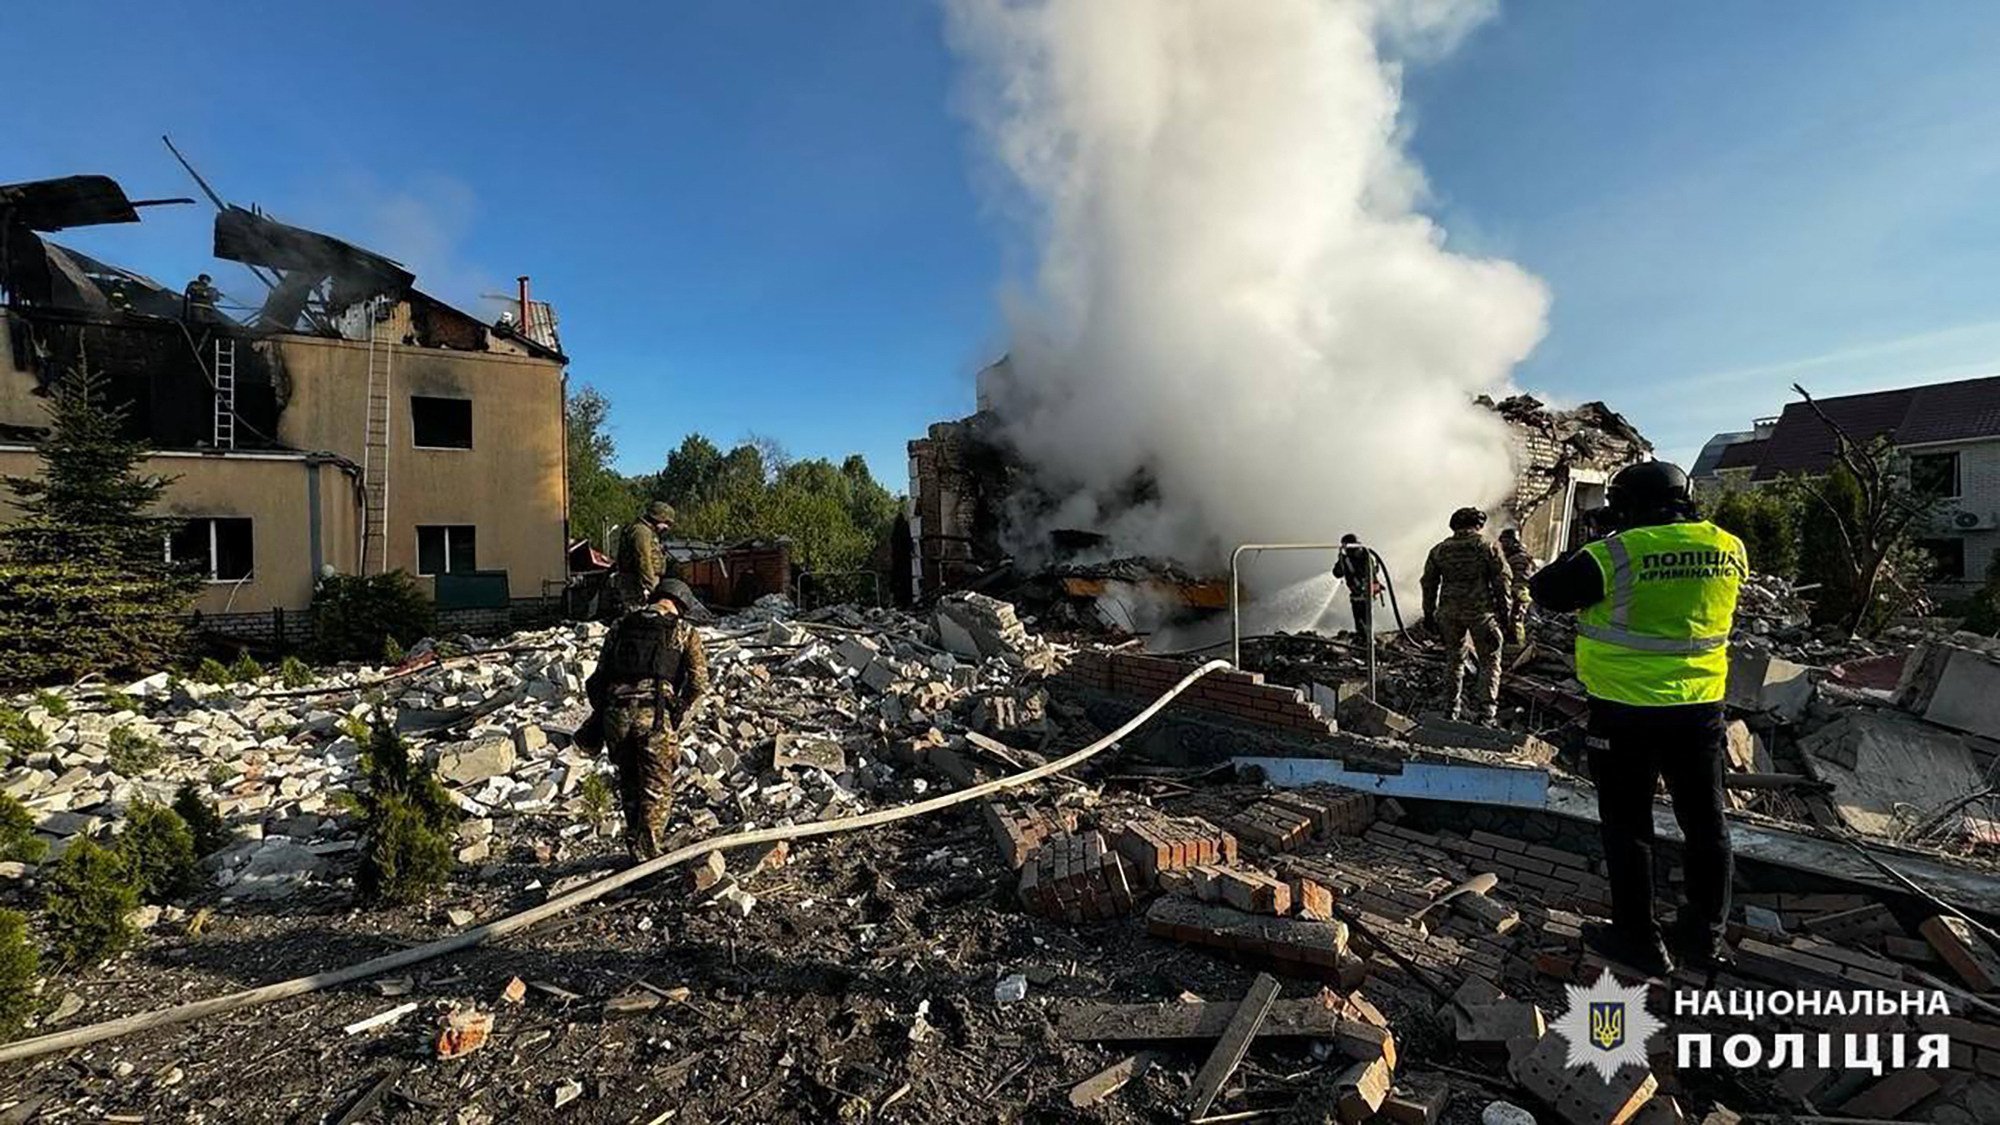 Crews extinguish fires of private houses destroyed by a shelling in Kharkiv, eastern Ukraine. Photo: National Police of Ukraine/AFP